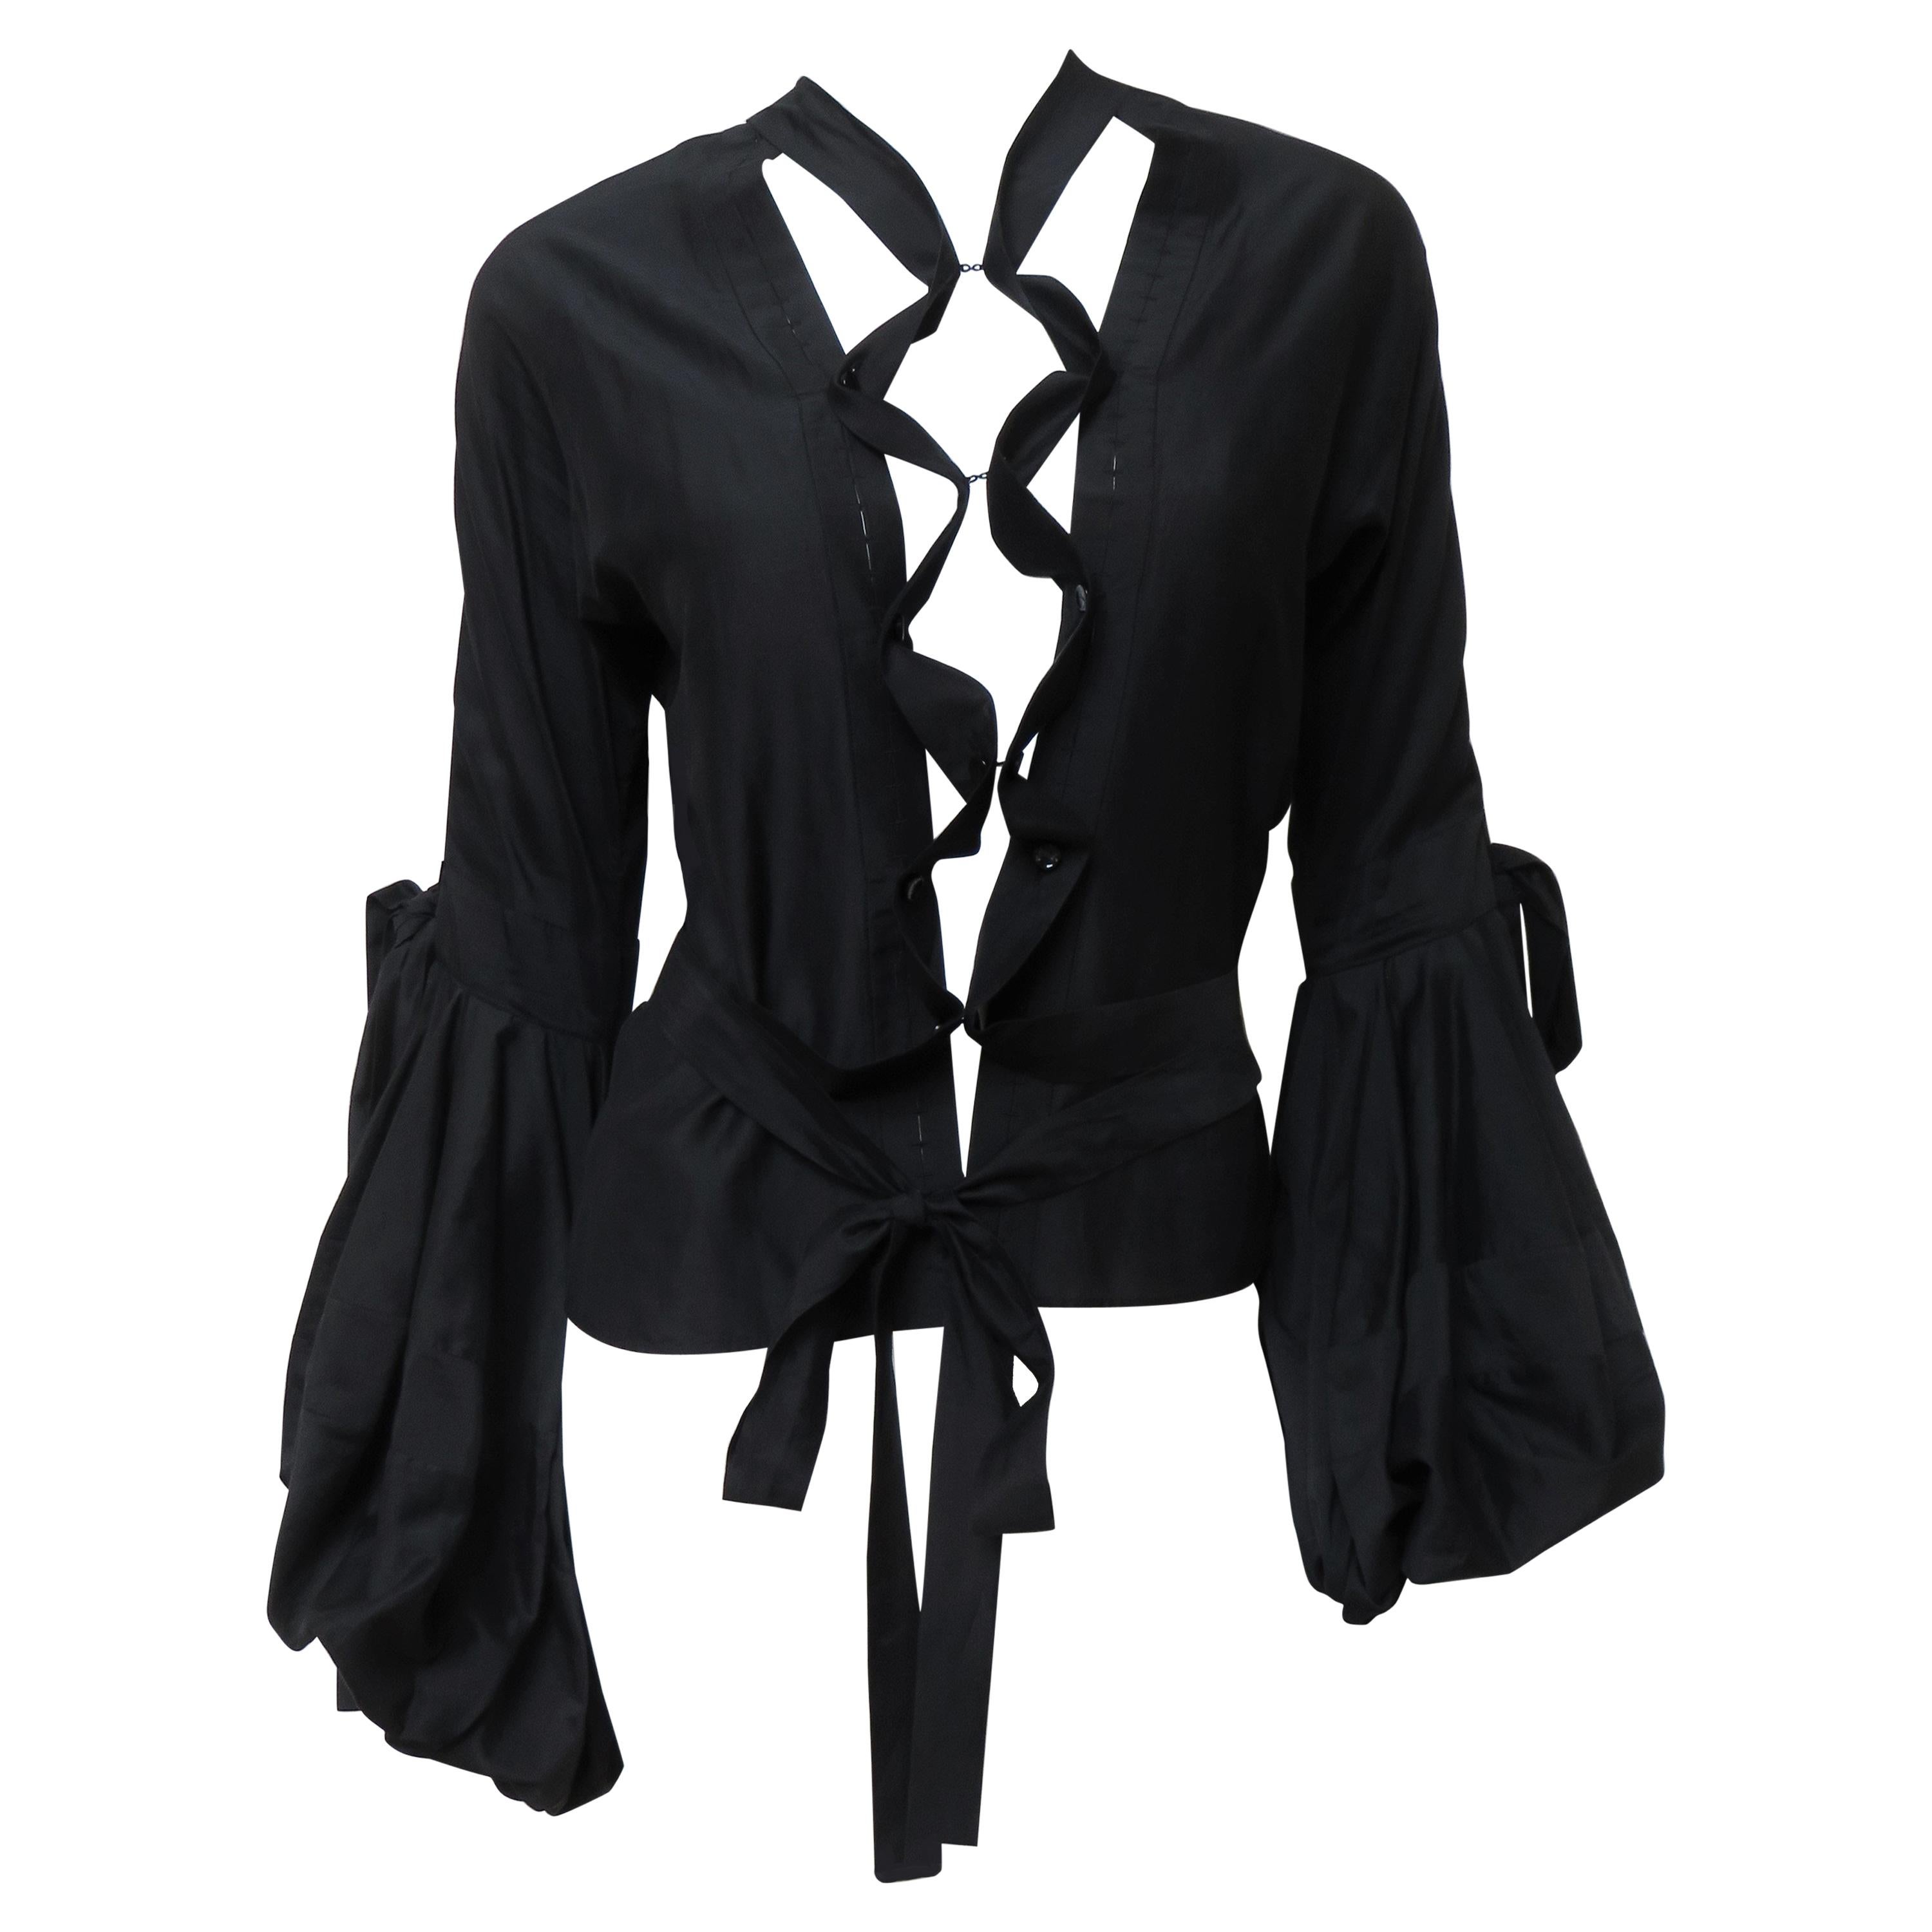 Tom Ford for Yves Saint Laurent Lace up Blouse F/W 2002